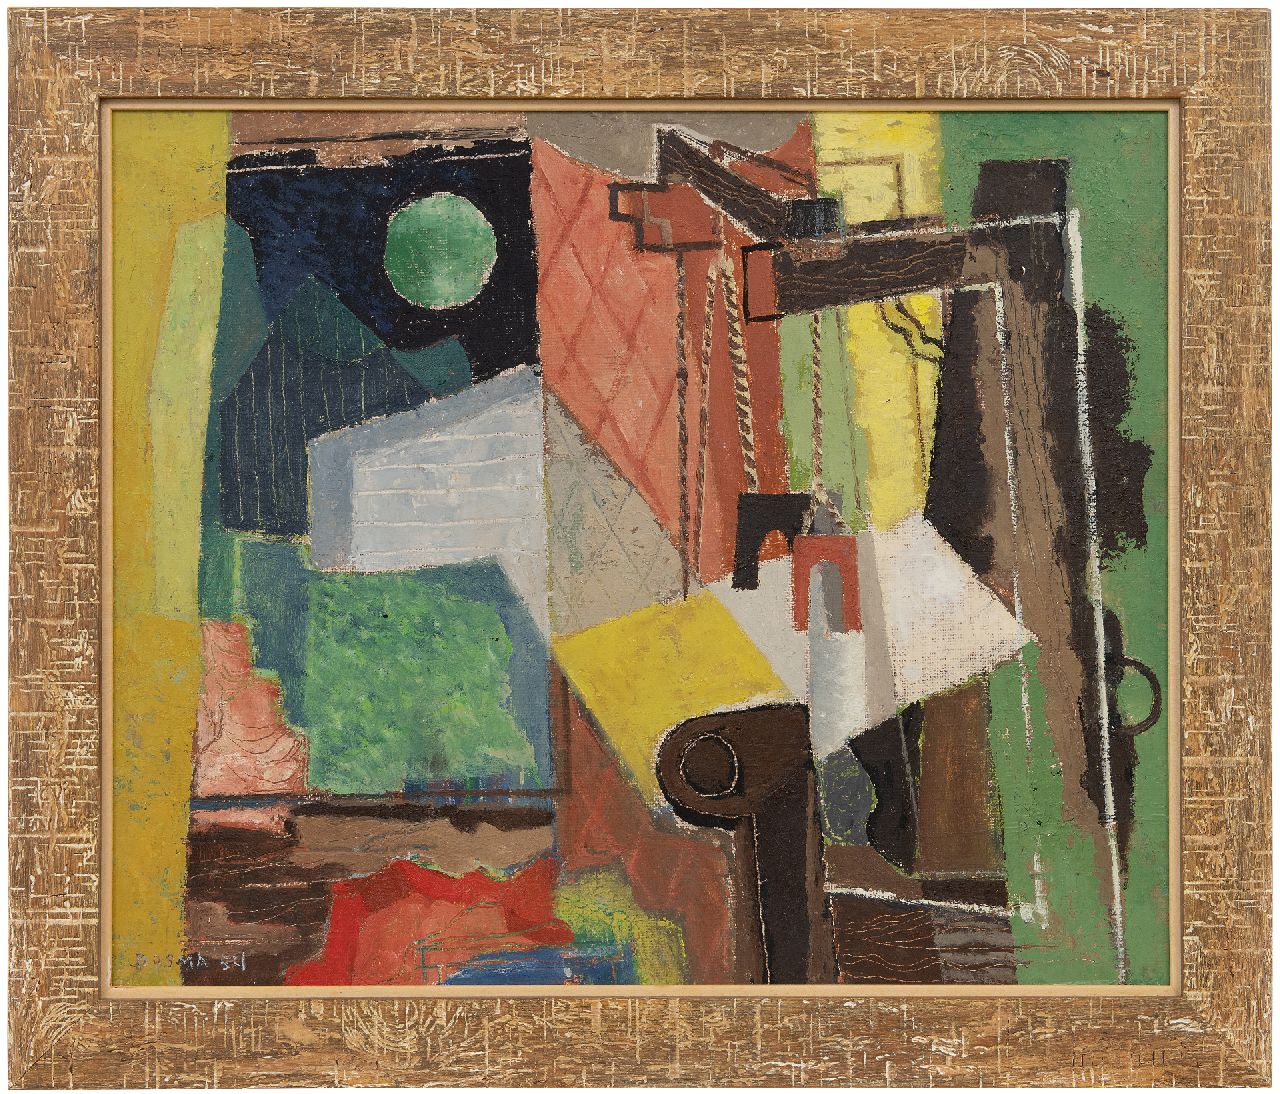 Bosma W.  | Willem 'Wim' Bosma | Paintings offered for sale | Composition with wavingloom, oil on board 49.0 x 59.9 cm, signed l.l. and on the reverse and dated '54